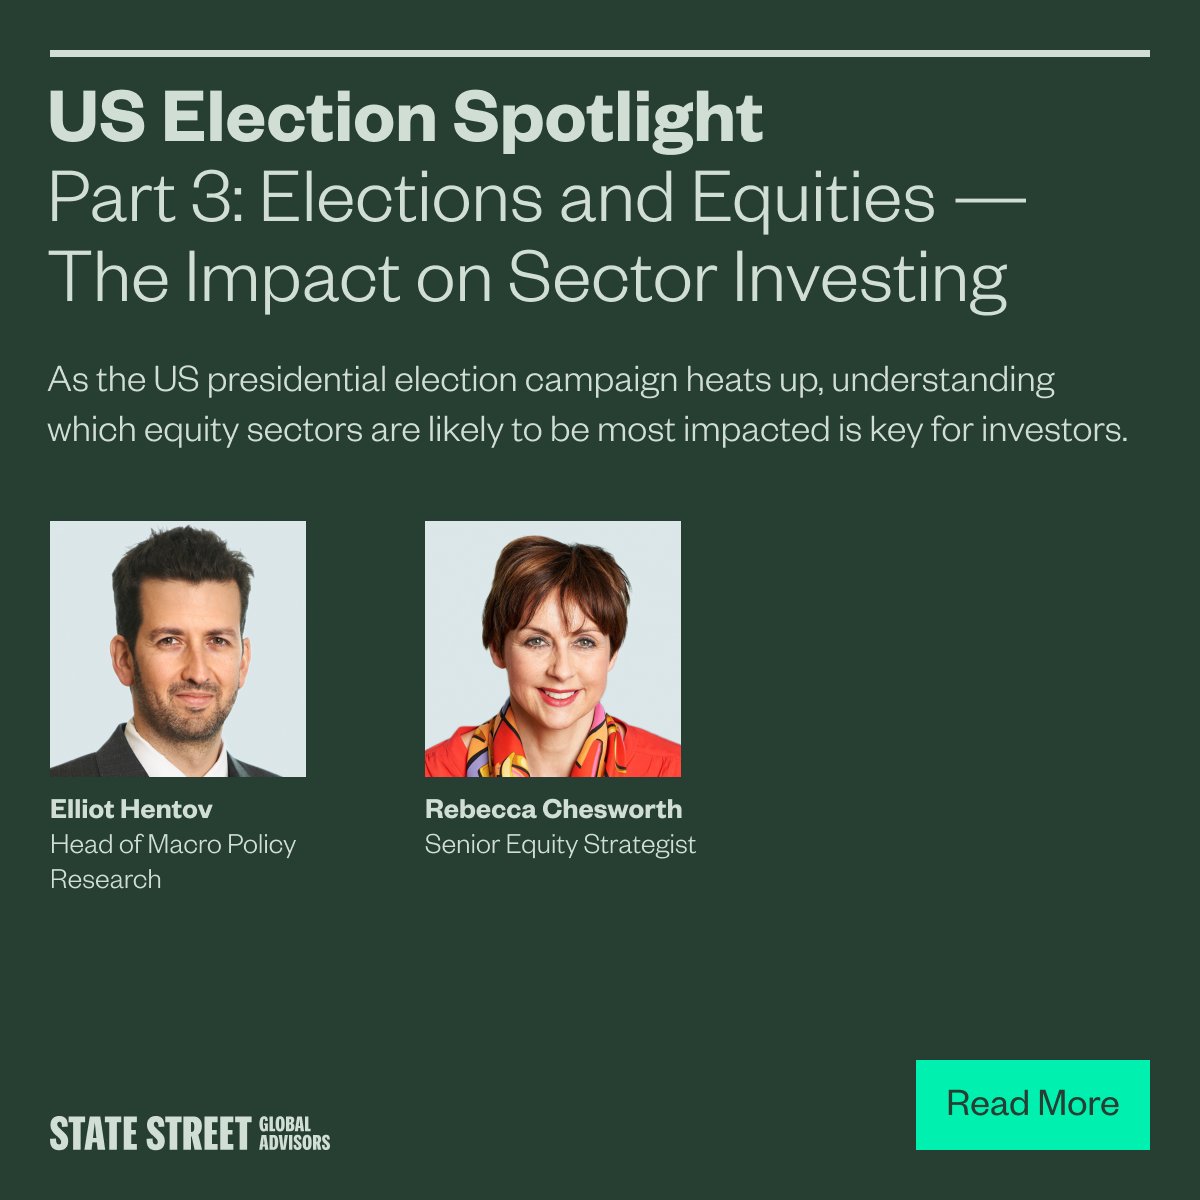 In election years, investors in US equities have historically used sector investing to reflect views on the parties’ policy stances. We look at which sectors are likely to benefit or lose out, depending on the election outcome. Read more: ms.spr.ly/6019YwBOZ #USelection